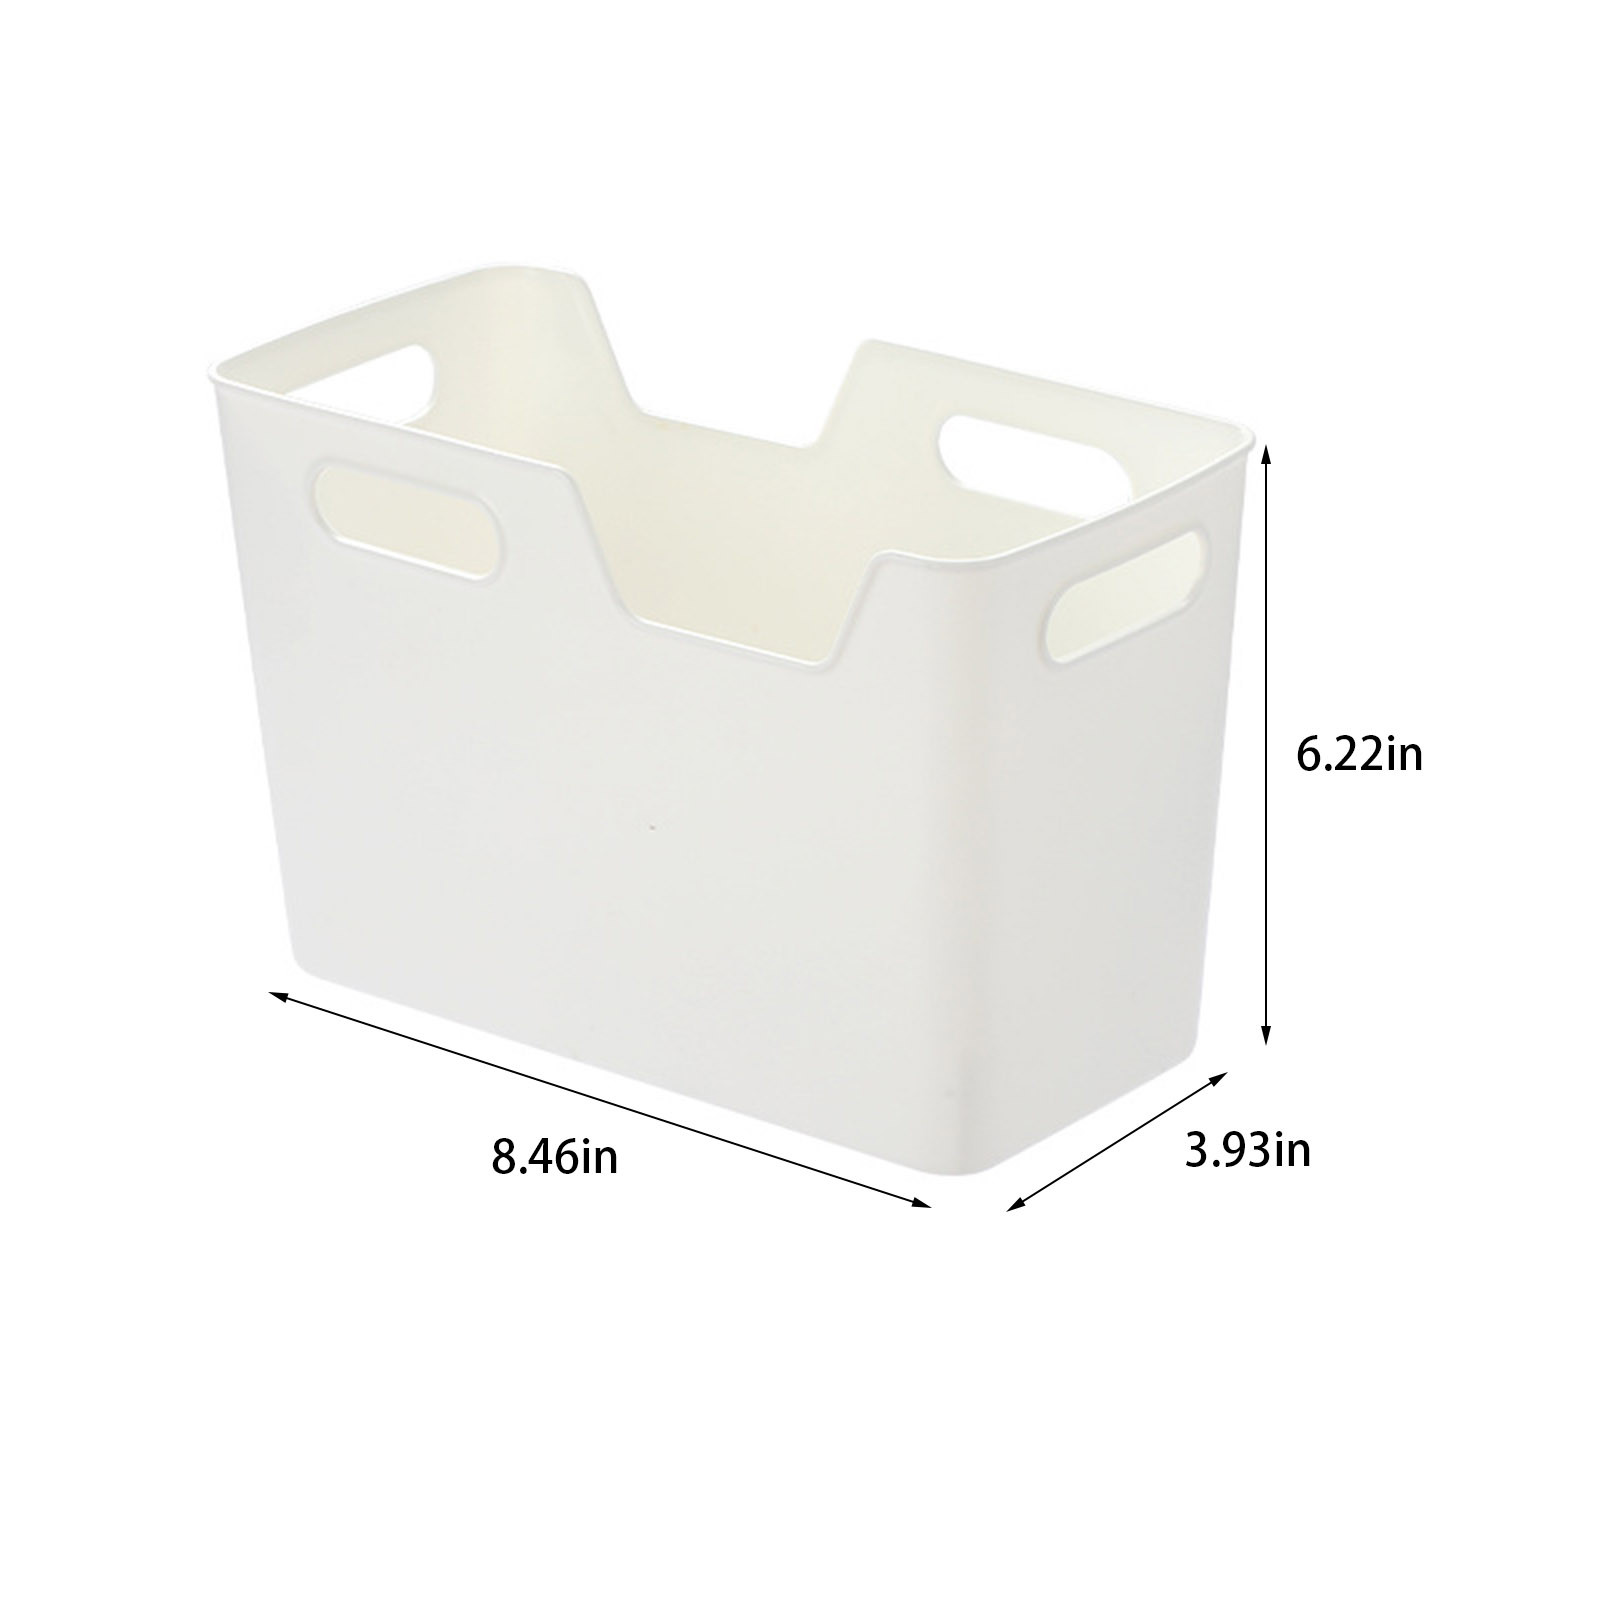 KQJQS White Plastic Storage Bins For Pantry Organization With Four Handles - image 3 of 8